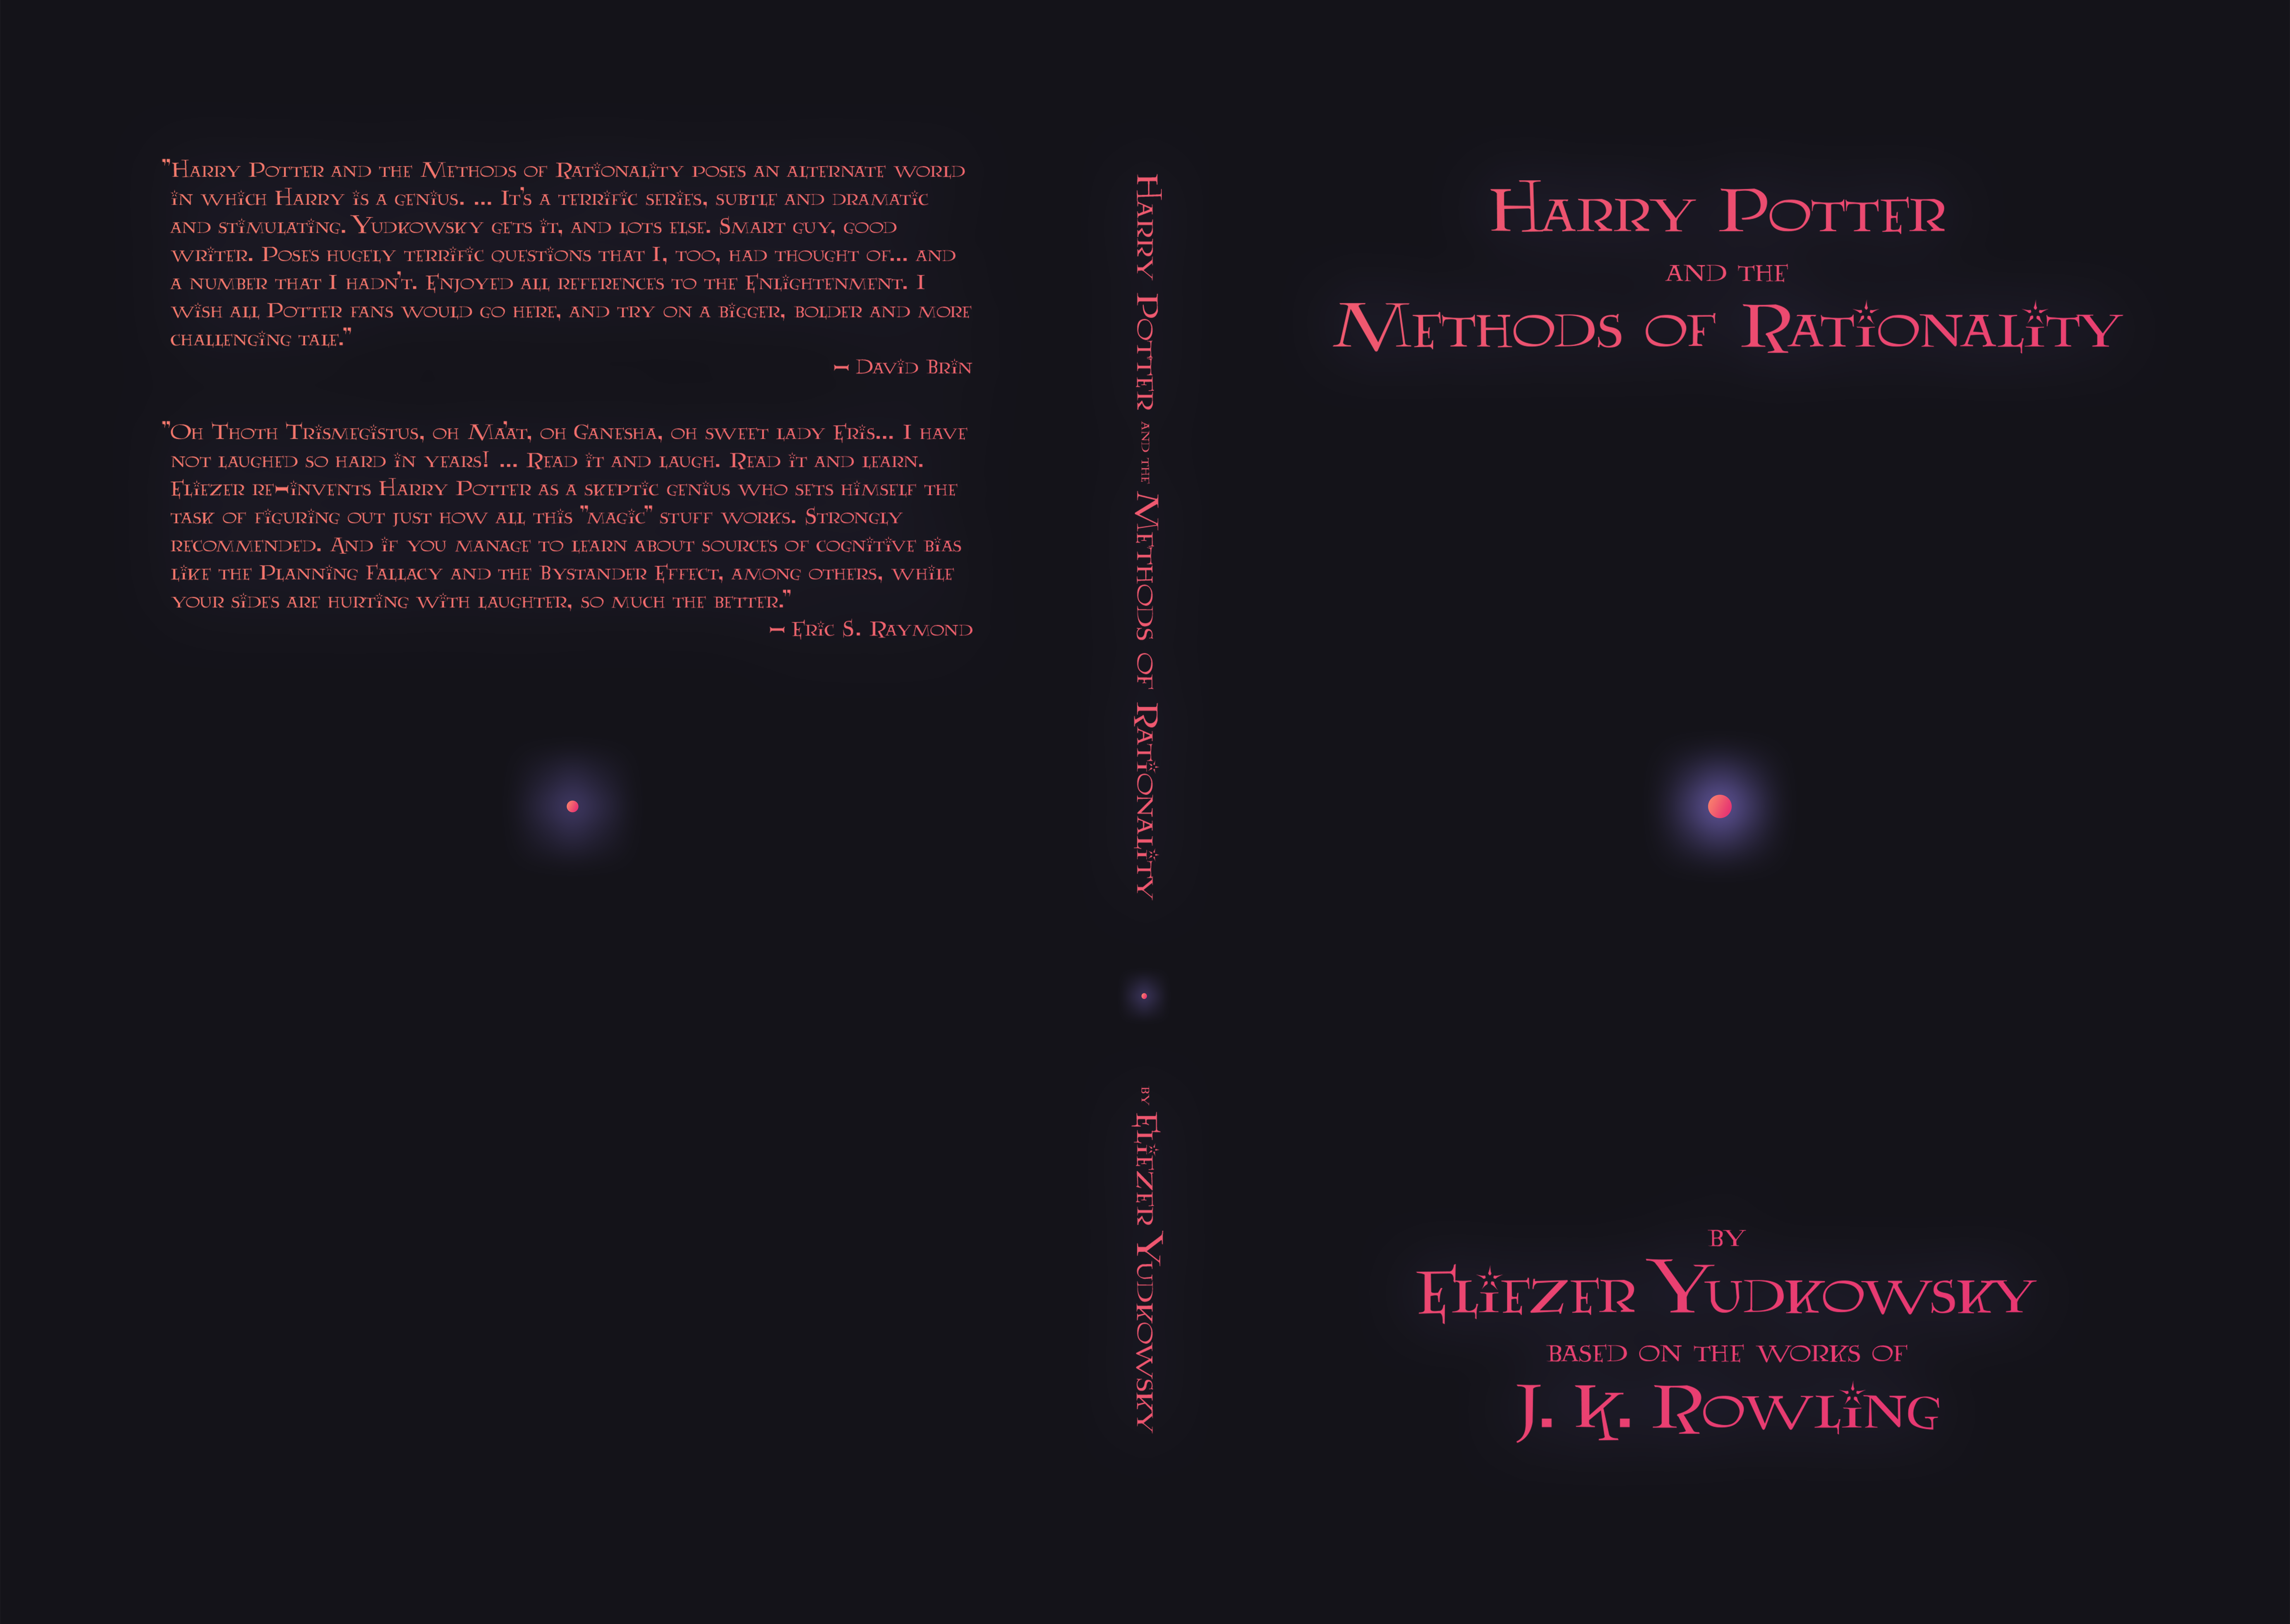 Volume 1: Harry Potter and the Methods of Rationality